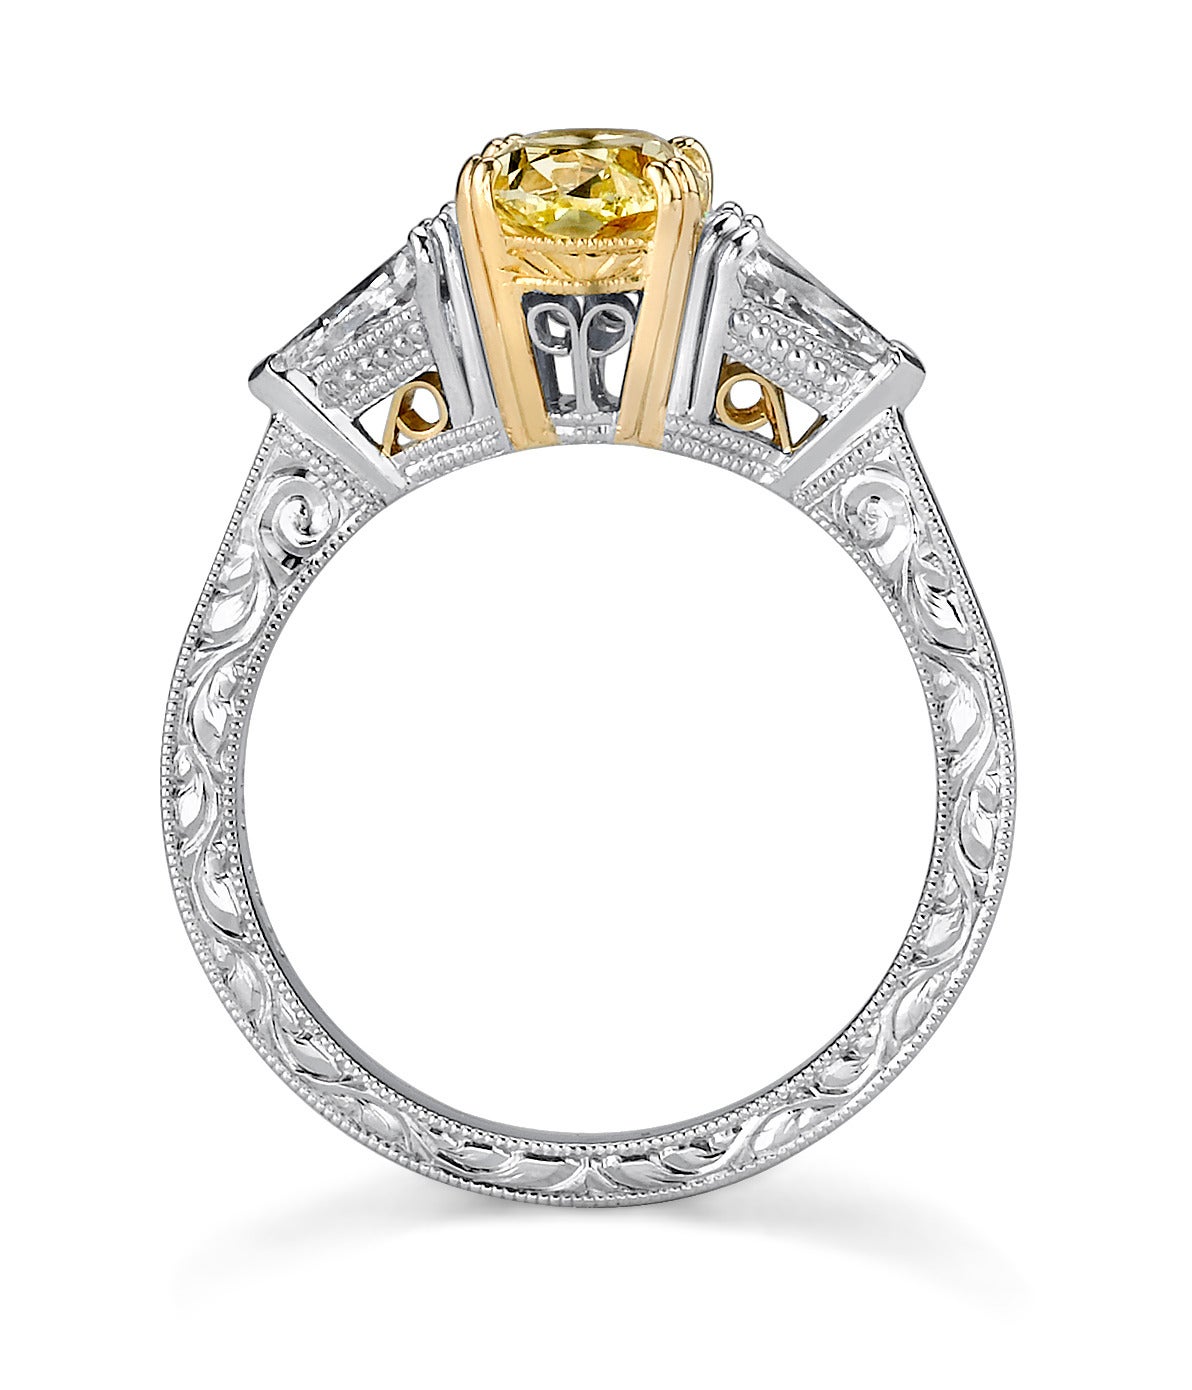 Fancy Oval Canary Yellow Diamond set in Platinum and accented with two .75ct Kite Shaped Side Diamonds. GIA Certified, center diamond, Fancy Yellow 1.18 CT Center Stone.

For centuries, fancy color diamonds have adorned kings and queens from all